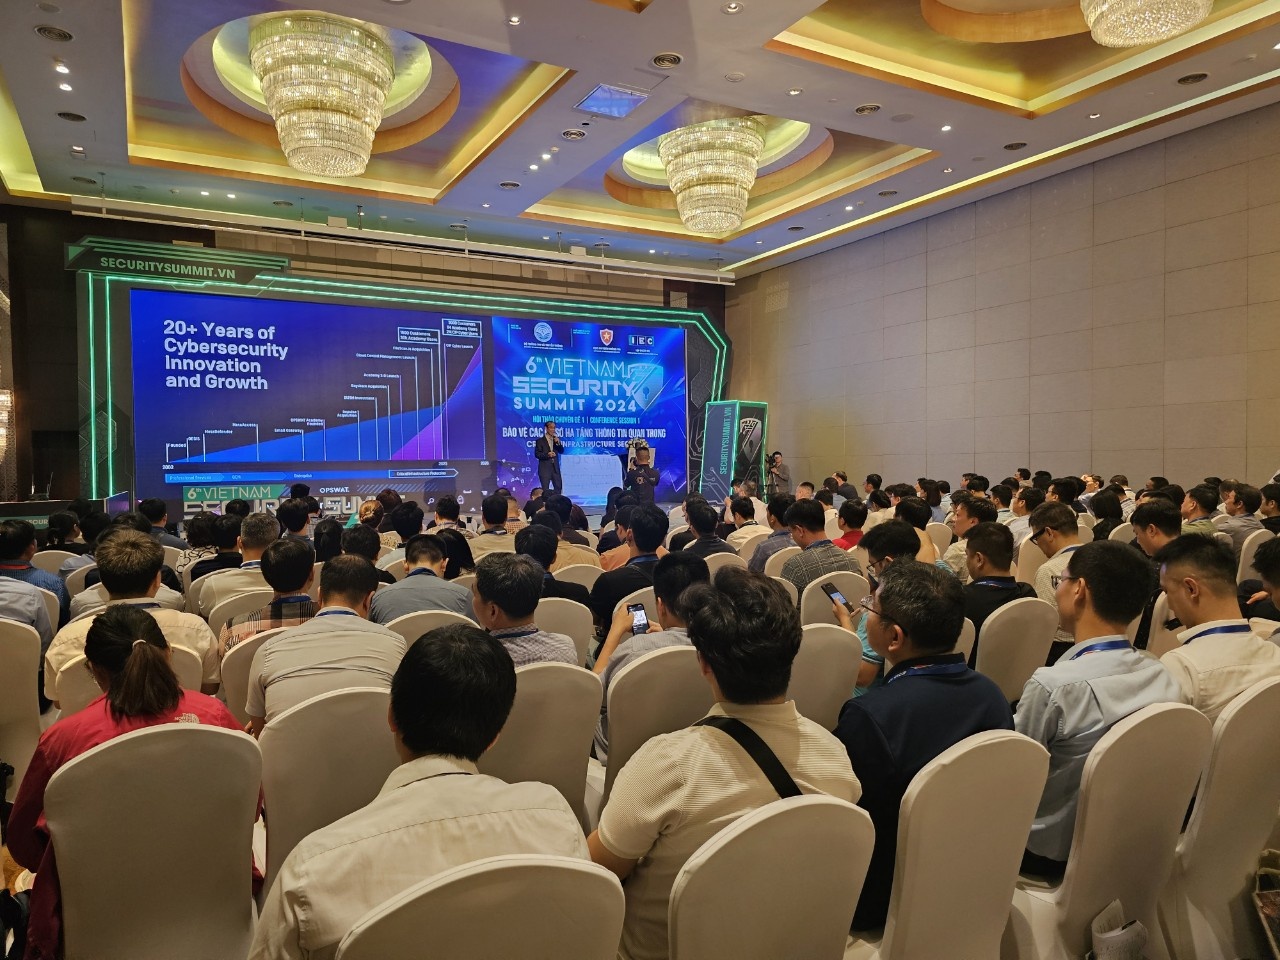 OPSWAT presents advanced cybersecurity solutions at Vietnam Security Summit 2024